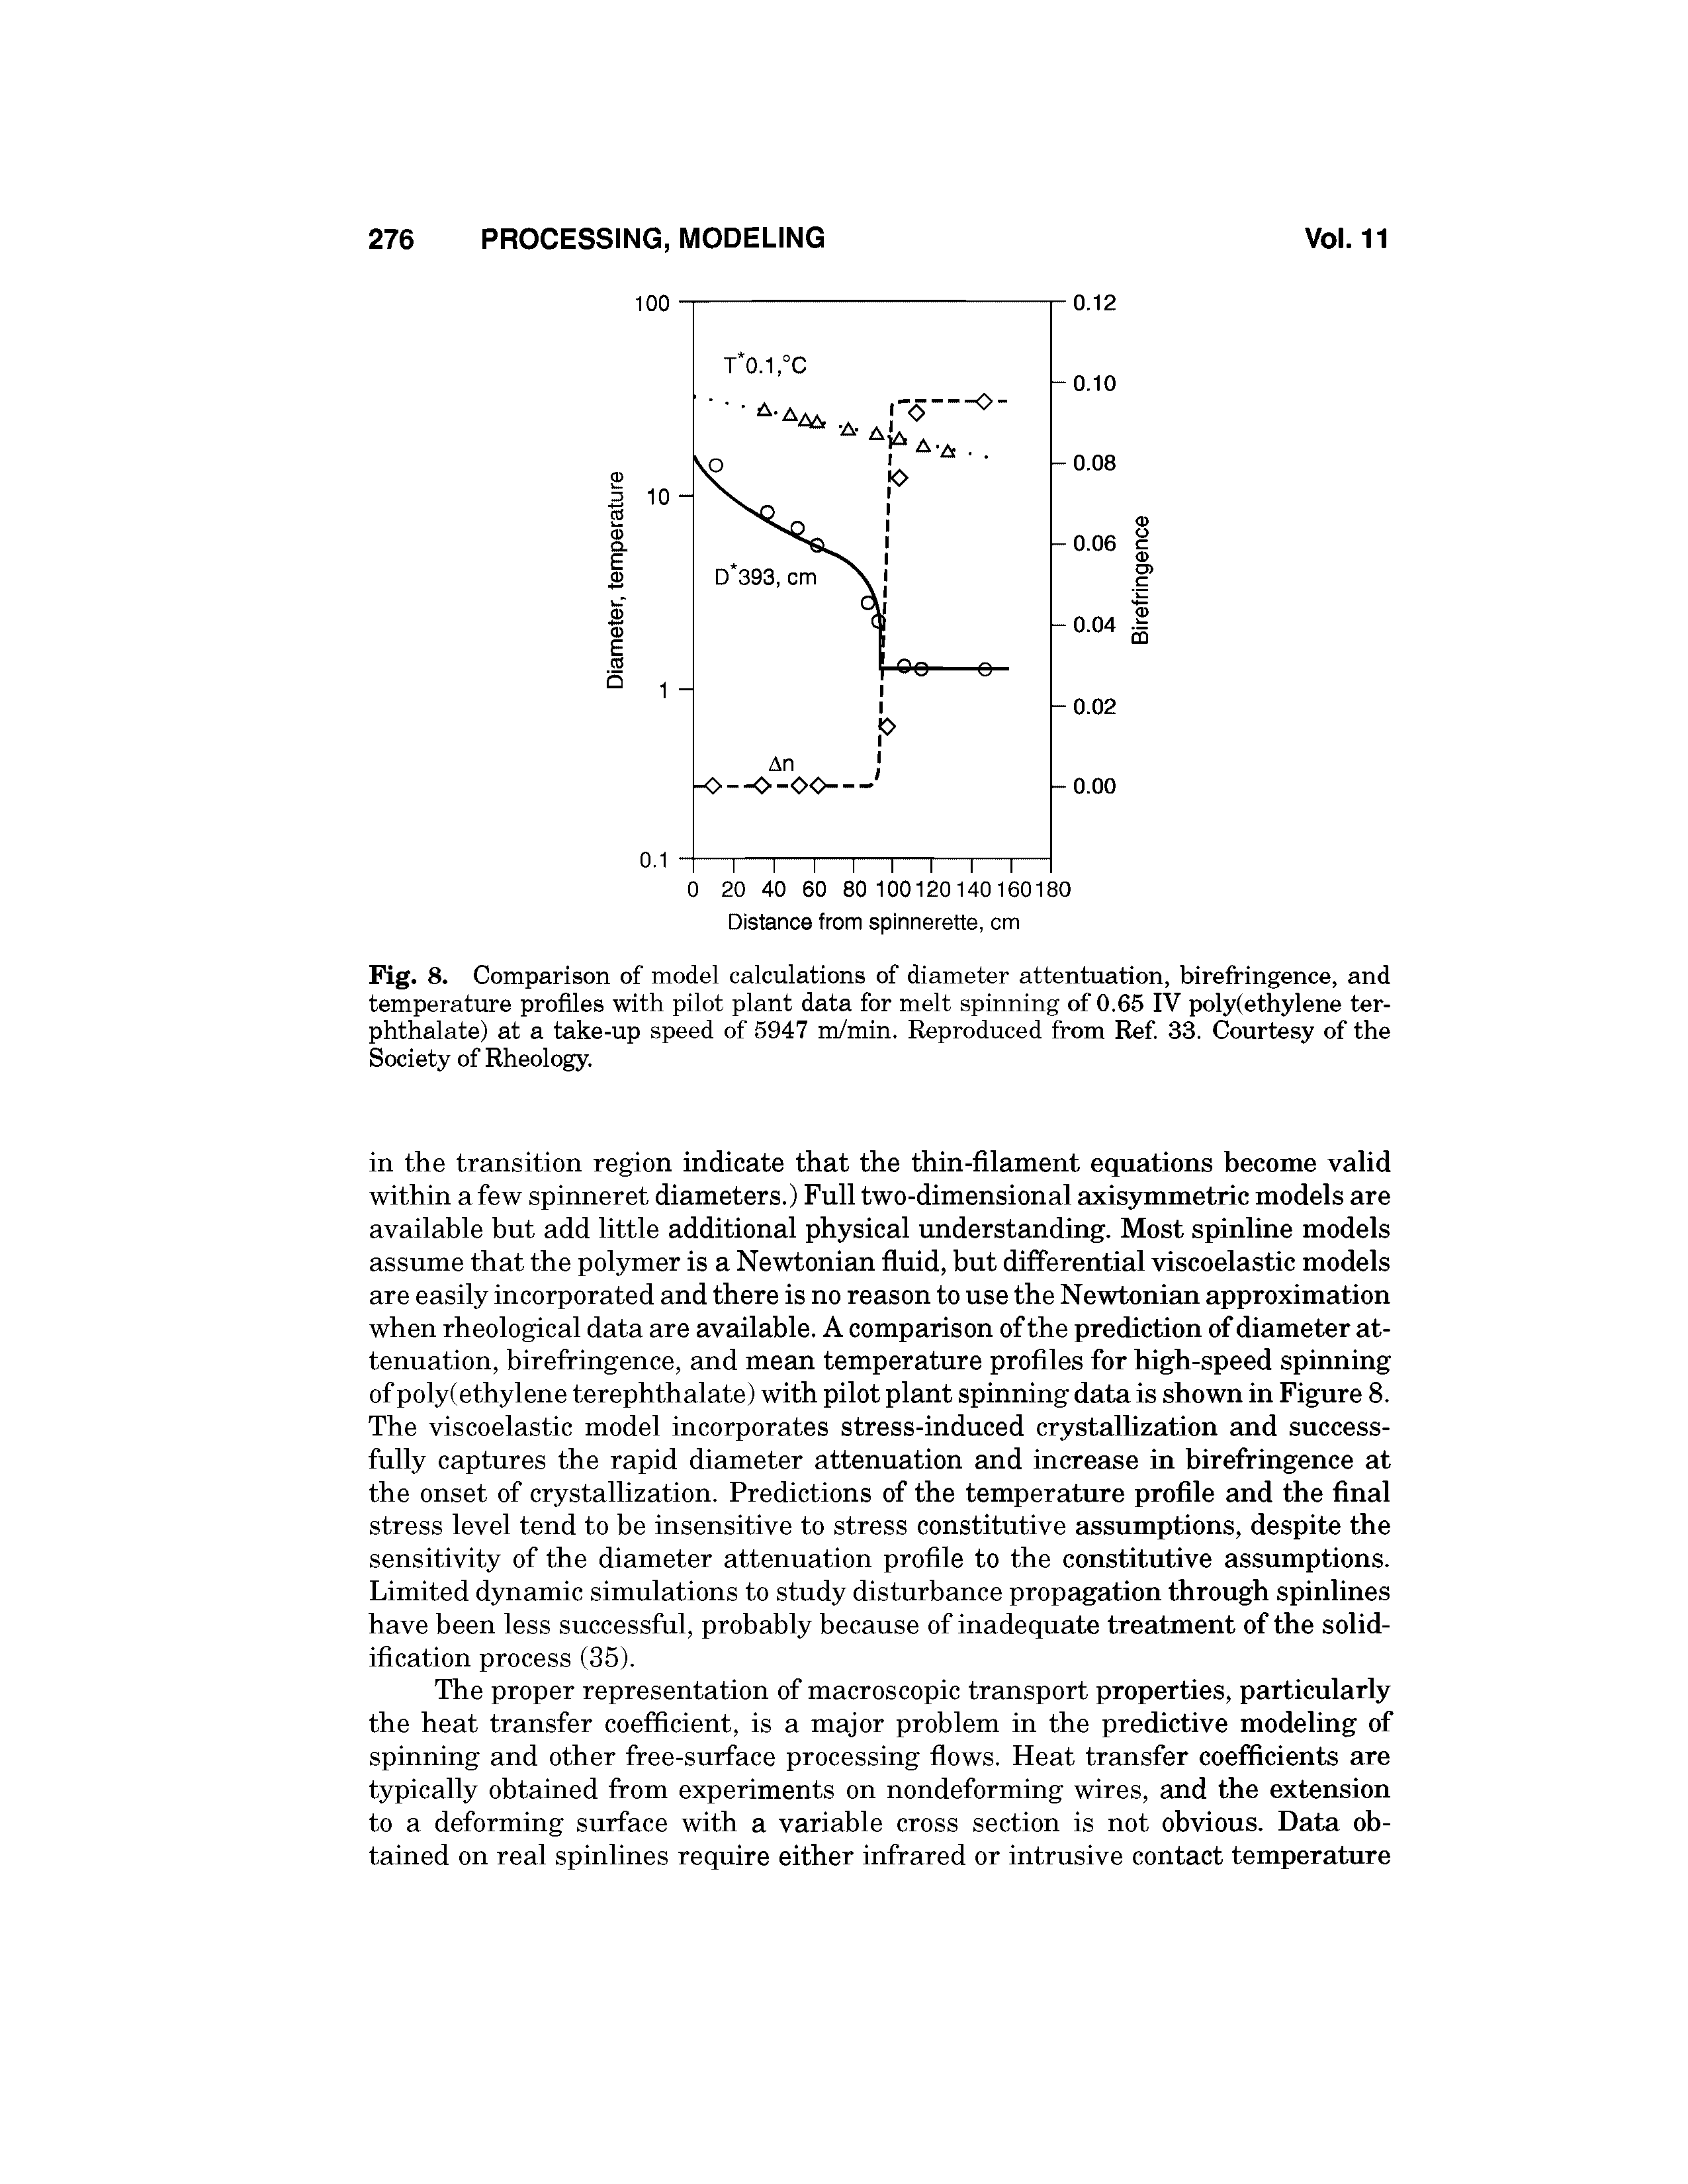 Fig. 8. Comparison of model calculations of diameter attentuation, birefringence, and temperature profiles with pilot plant data for melt spinning of 0.65 IV poly(ethylene ter-phthalate) at a take-up speed of 5947 m/min. Reproduced from Ref. 33. Courtesy of the Society of Rheology.